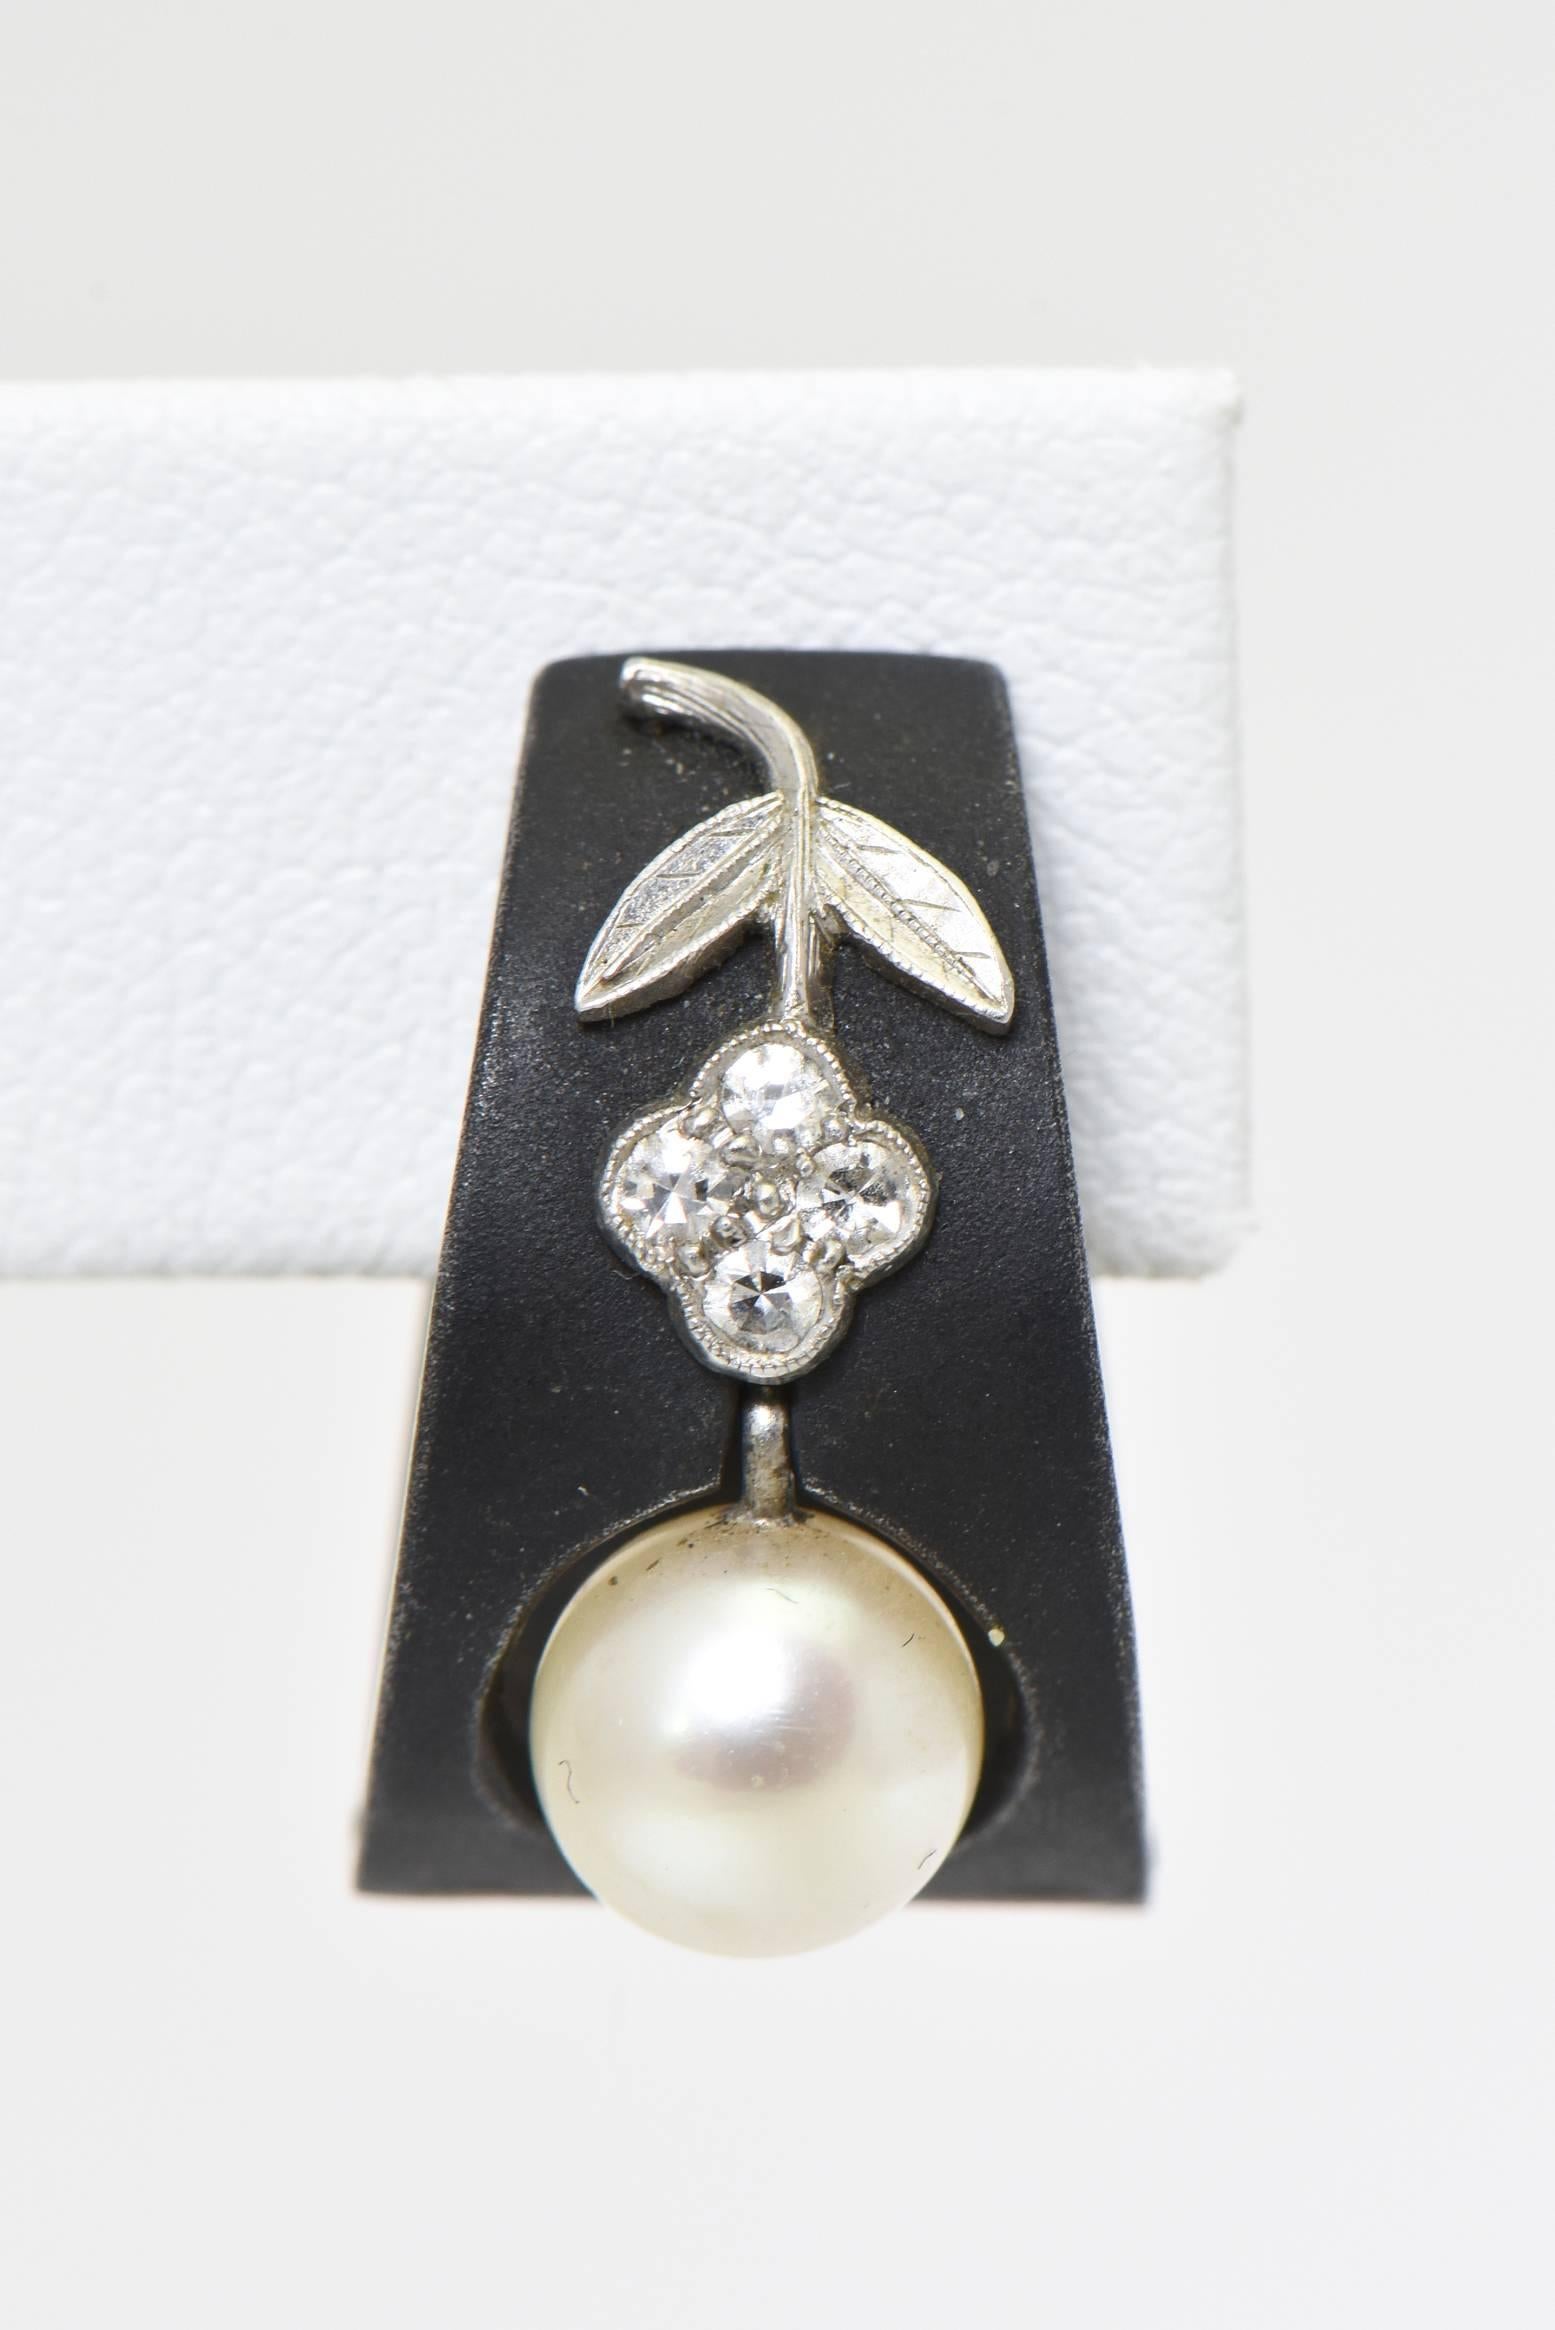 These hard to find earrings are part of my mother's personal collection.  Over the last 30 years, she has only found a few Marsh pieces.  These earrings feature cultured pearls dangling in a patinated steel geometric frame accented with a flower